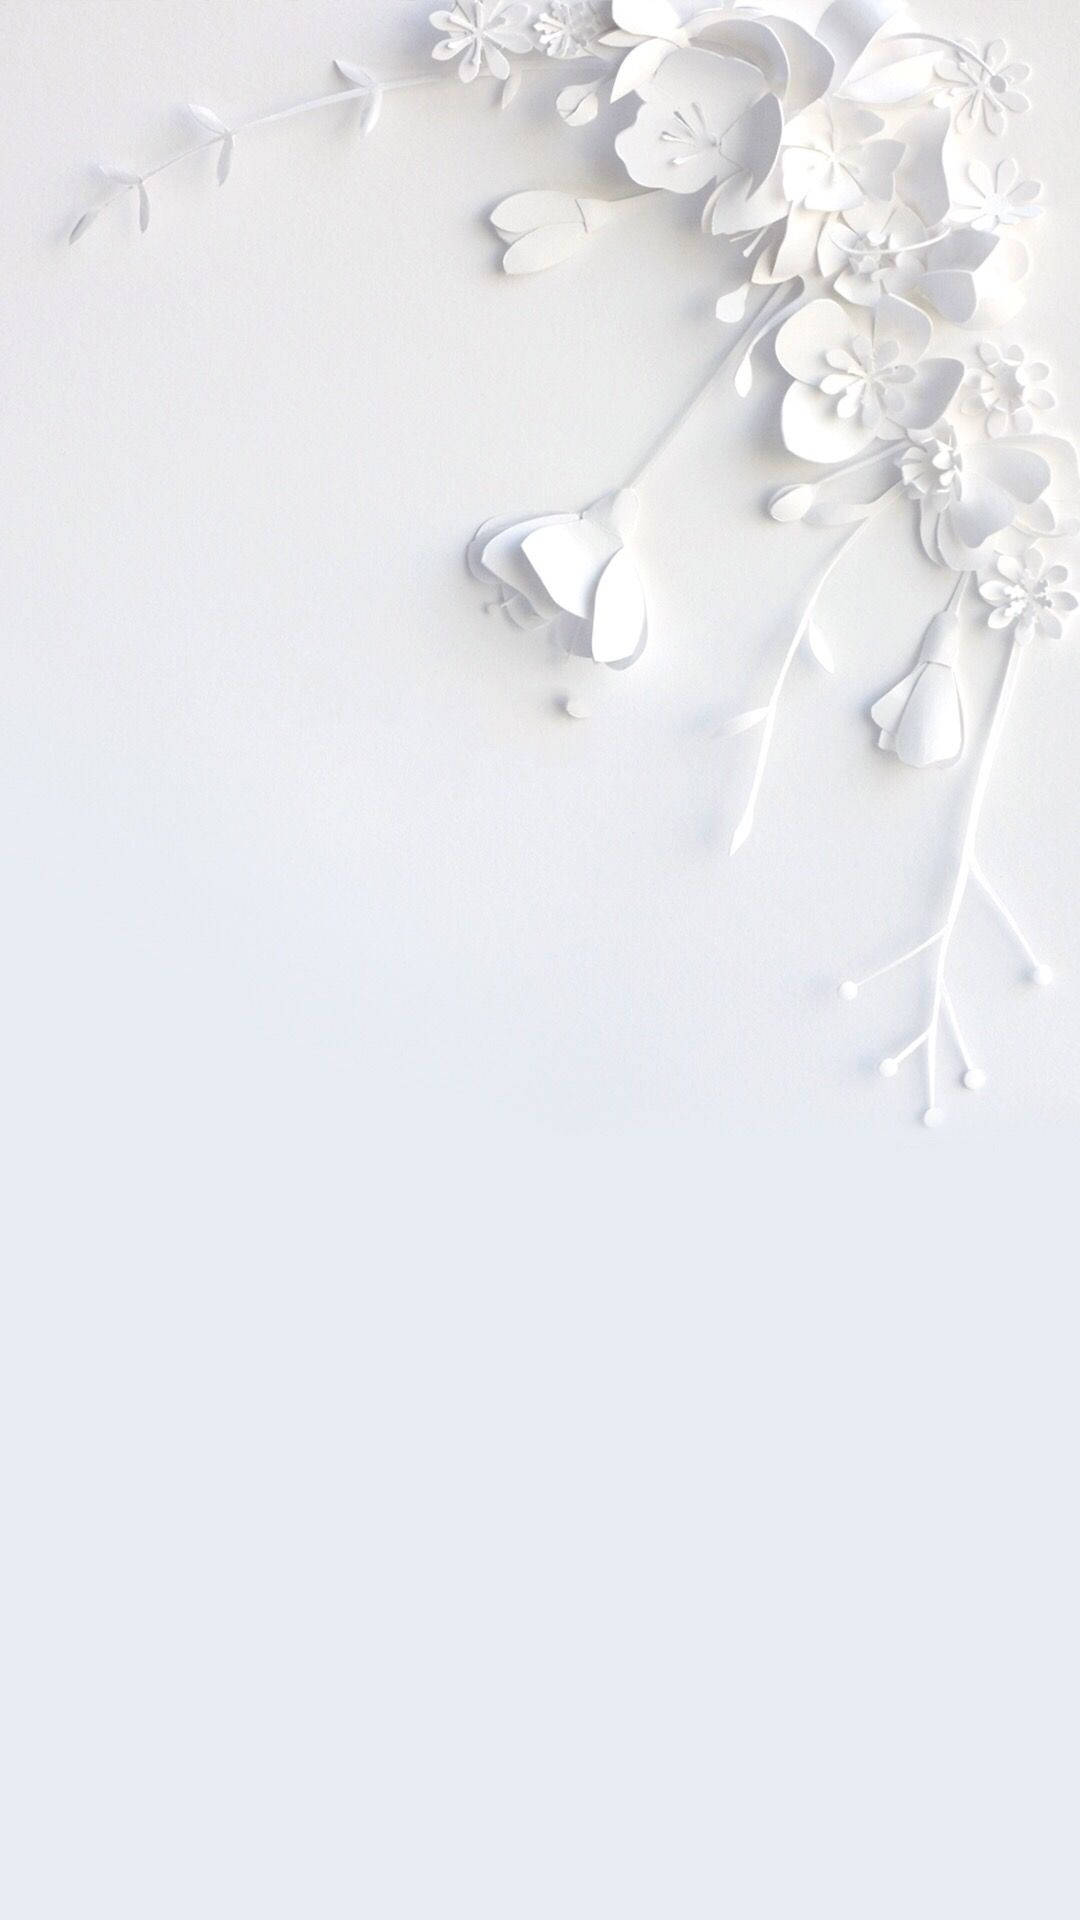 Caption: Elegance in Simplicity: White Flower Design for iPhone Wallpaper